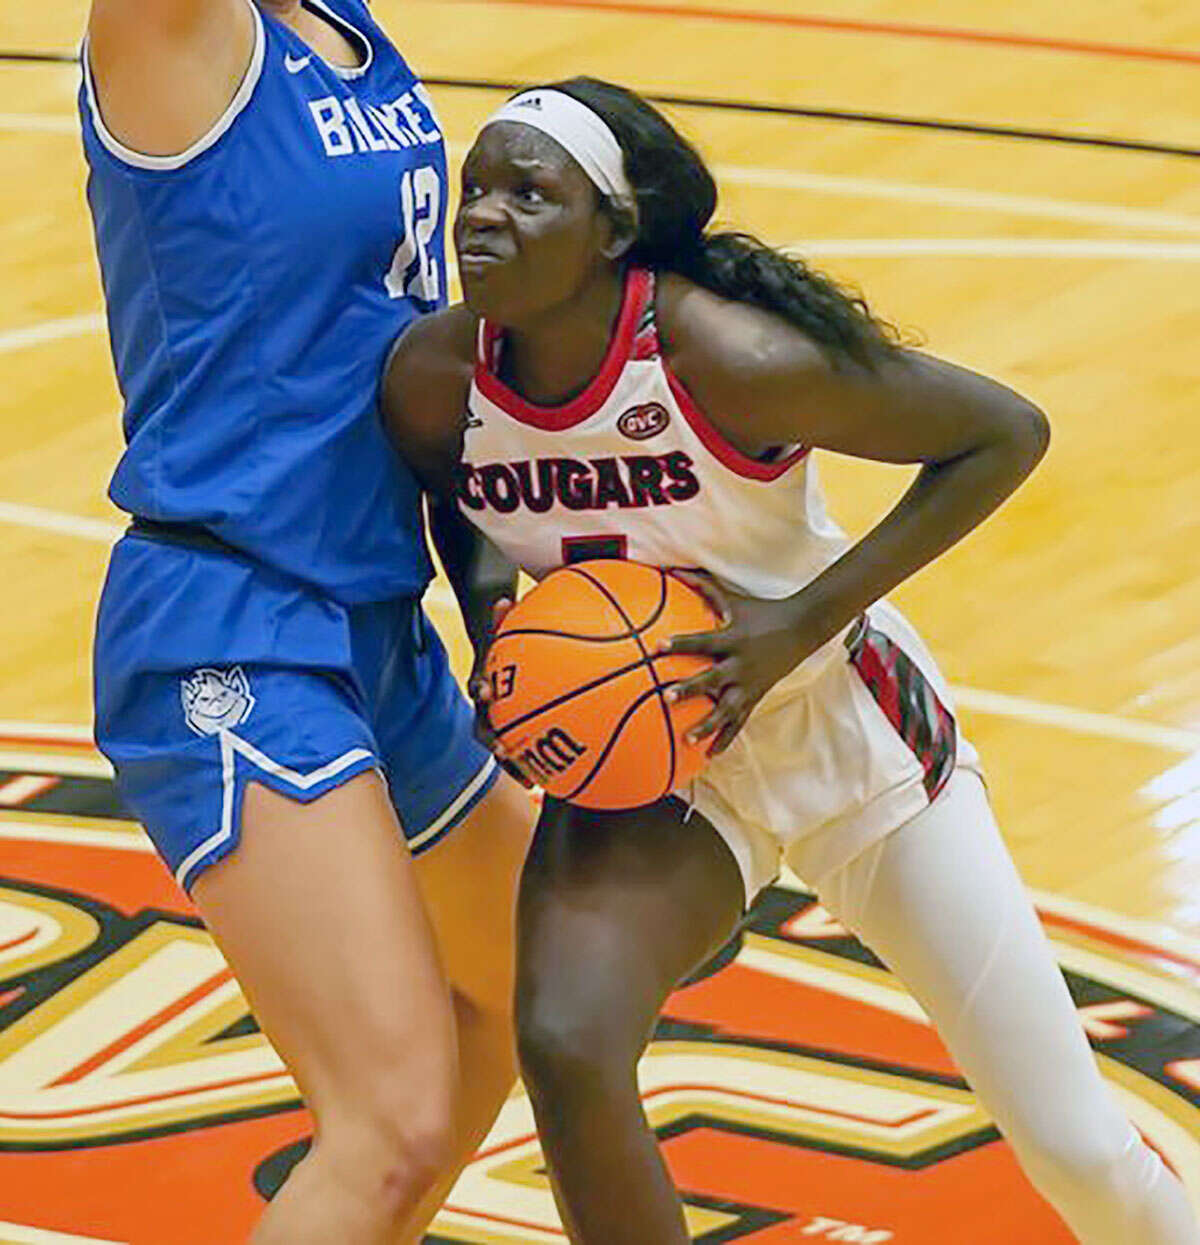 SIUE's Ajulu Thatha scored 15 points in her team's 89-65 loss at Eastern Illinois University Monday night in Charleston.